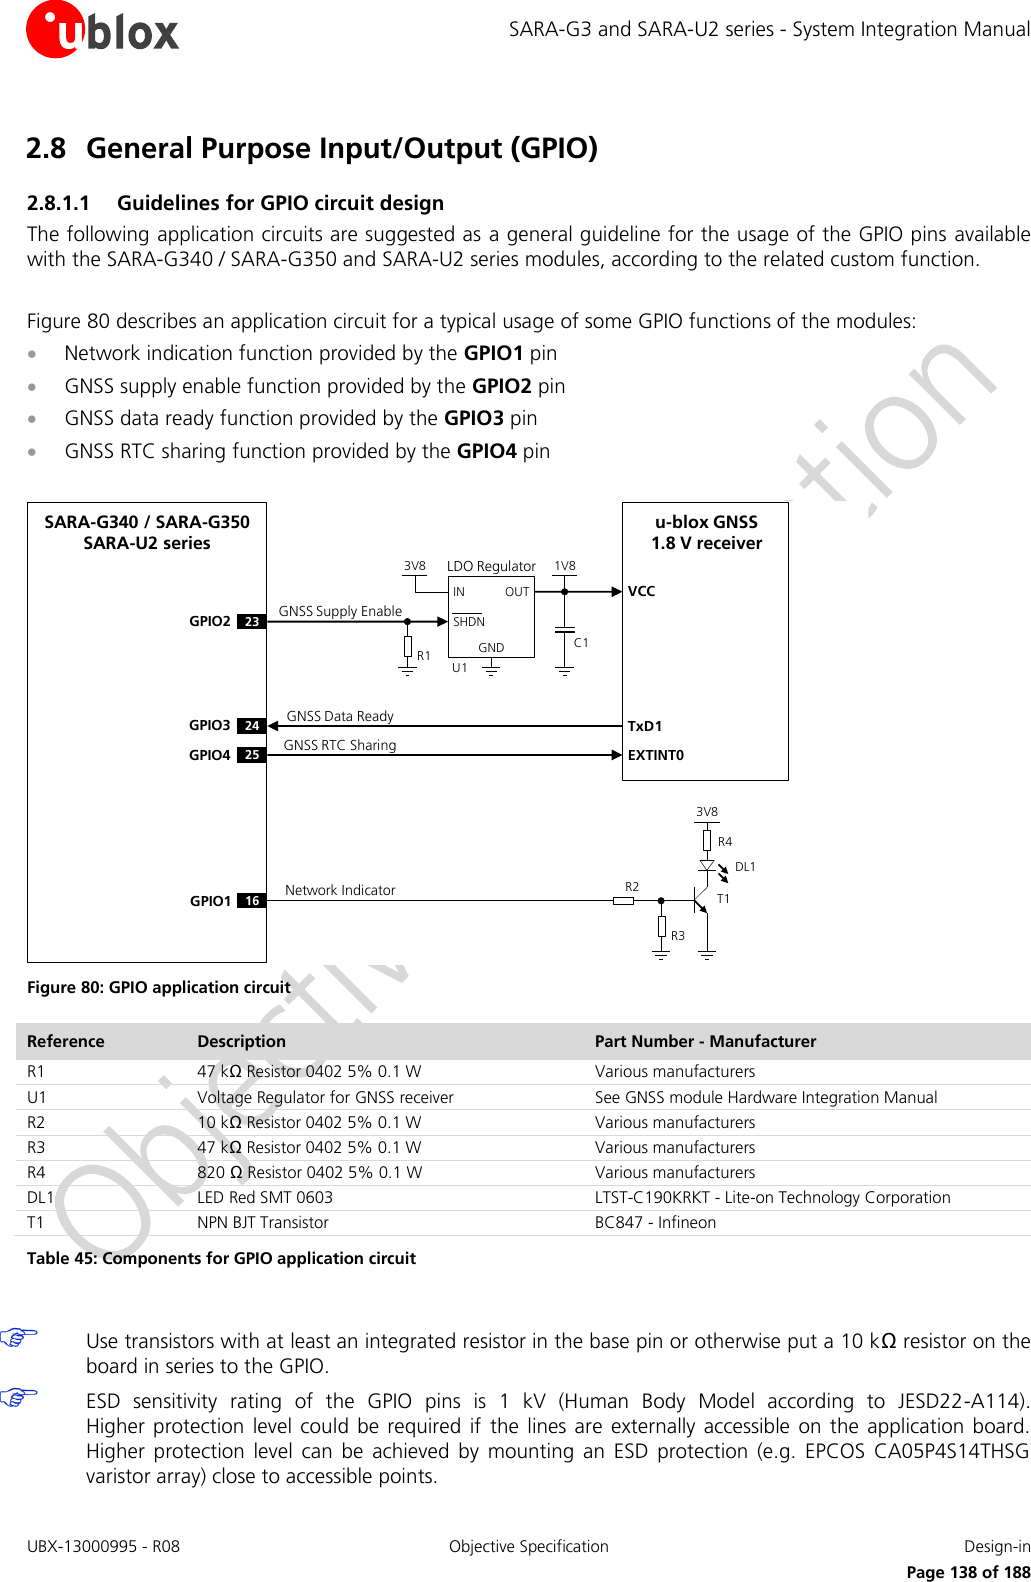 SARA-G3 and SARA-U2 series - System Integration Manual UBX-13000995 - R08  Objective Specification  Design-in     Page 138 of 188 2.8 General Purpose Input/Output (GPIO) 2.8.1.1 Guidelines for GPIO circuit design The following application circuits are suggested as a general guideline for the usage of the GPIO pins available with the SARA-G340 / SARA-G350 and SARA-U2 series modules, according to the related custom function.  Figure 80 describes an application circuit for a typical usage of some GPIO functions of the modules:  Network indication function provided by the GPIO1 pin  GNSS supply enable function provided by the GPIO2 pin  GNSS data ready function provided by the GPIO3 pin  GNSS RTC sharing function provided by the GPIO4 pin  OUTINGNDLDO RegulatorSHDN3V8 1V8GPIO3GPIO4TxD1EXTINT02425R1VCCGPIO2 23SARA-G340 / SARA-G350SARA-U2 seriesu-blox GNSS 1.8 V receiverU1C1R2R43V8Network IndicatorR3GNSS Supply EnableGNSS Data ReadyGNSS RTC Sharing16GPIO1DL1T1 Figure 80: GPIO application circuit Reference Description Part Number - Manufacturer R1 47 kΩ Resistor 0402 5% 0.1 W Various manufacturers U1 Voltage Regulator for GNSS receiver See GNSS module Hardware Integration Manual R2 10 kΩ Resistor 0402 5% 0.1 W Various manufacturers R3 47 kΩ Resistor 0402 5% 0.1 W Various manufacturers R4 820 Ω Resistor 0402 5% 0.1 W Various manufacturers DL1 LED Red SMT 0603 LTST-C190KRKT - Lite-on Technology Corporation T1 NPN BJT Transistor BC847 - Infineon Table 45: Components for GPIO application circuit   Use transistors with at least an integrated resistor in the base pin or otherwise put a 10 kΩ resistor on the board in series to the GPIO.  ESD  sensitivity  rating  of  the  GPIO  pins  is  1  kV  (Human  Body  Model  according  to  JESD22-A114).  Higher  protection  level could  be  required  if  the lines are  externally accessible  on the  application  board. Higher  protection  level  can  be  achieved  by  mounting  an  ESD  protection  (e.g.  EPCOS  CA05P4S14THSG varistor array) close to accessible points. 